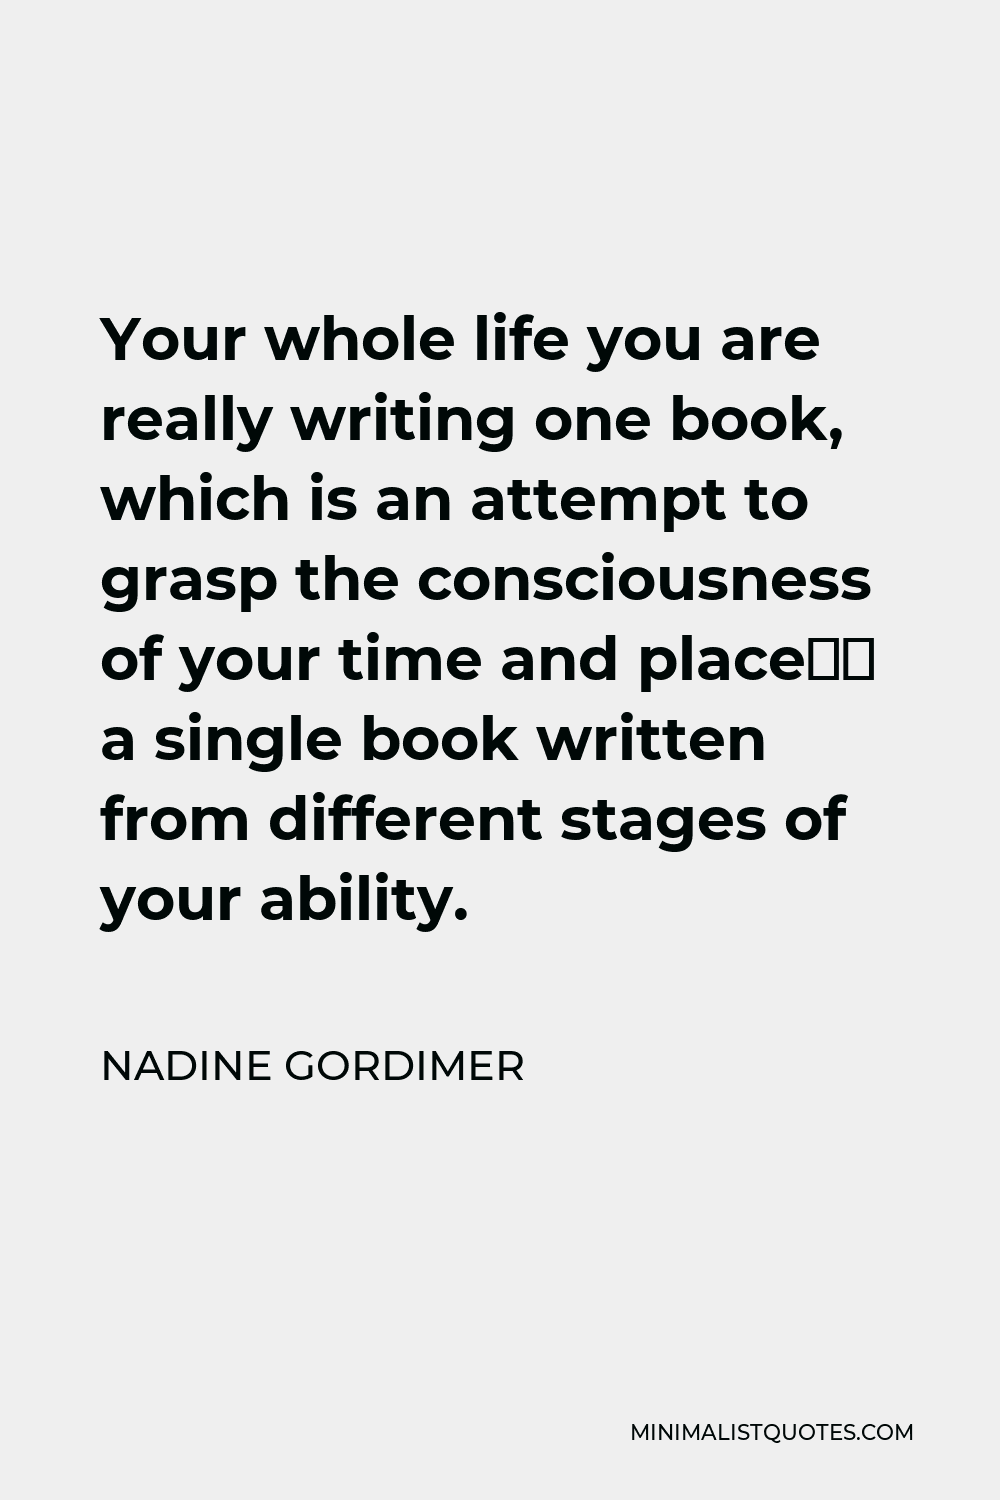 Nadine Gordimer Quote - Your whole life you are really writing one book, which is an attempt to grasp the consciousness of your time and place– a single book written from different stages of your ability.